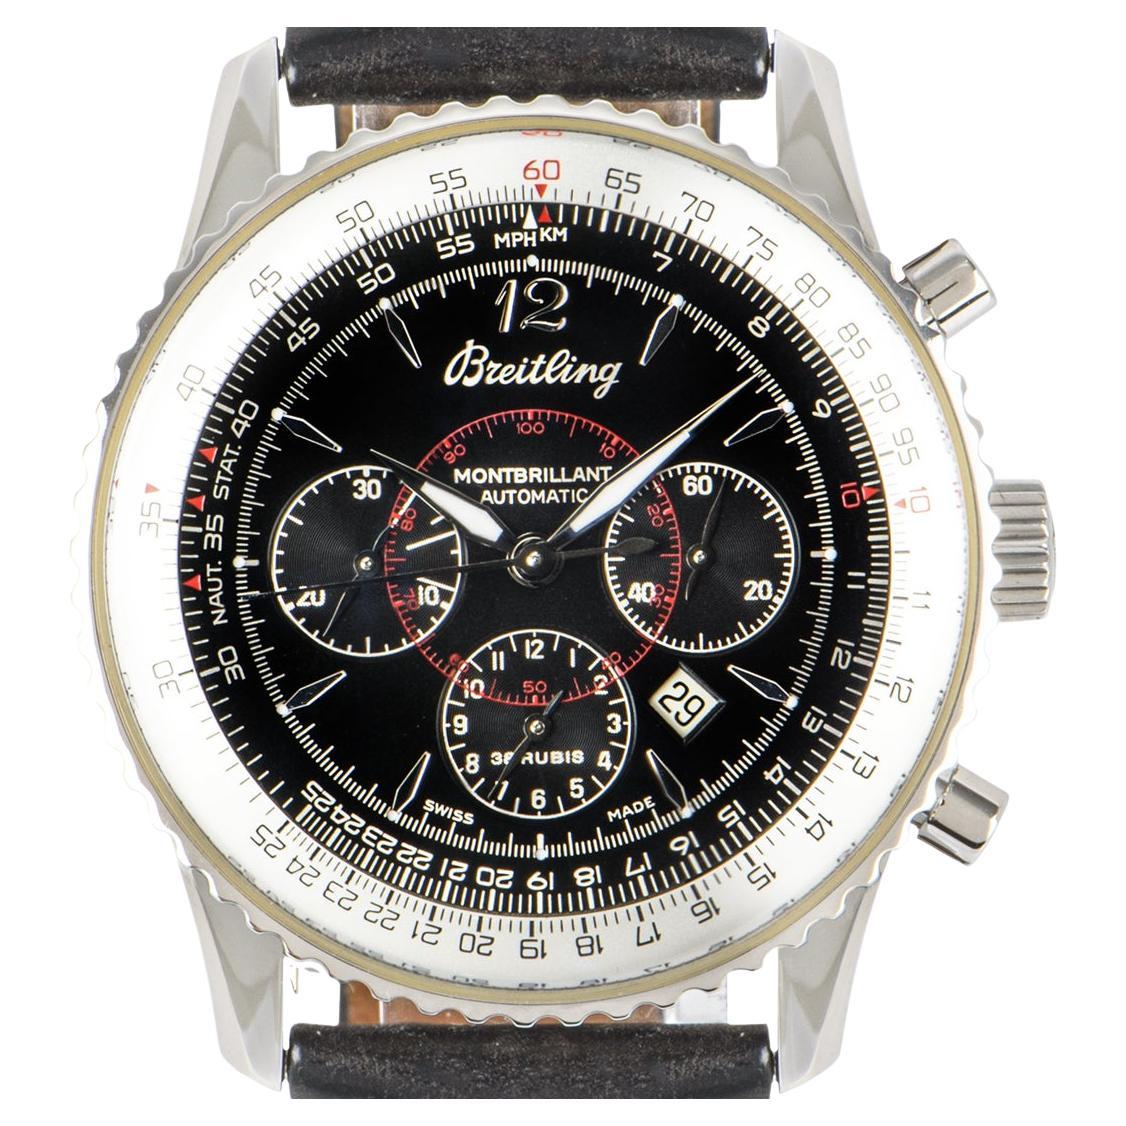 A stainless steel 38mm Montbrilliant from the Navitimer collection by Breitling.

The black dial features applied hour markers with a silver tachymeter scale around the outer edge and encased with sapphire crystal. On the reverse side, is a